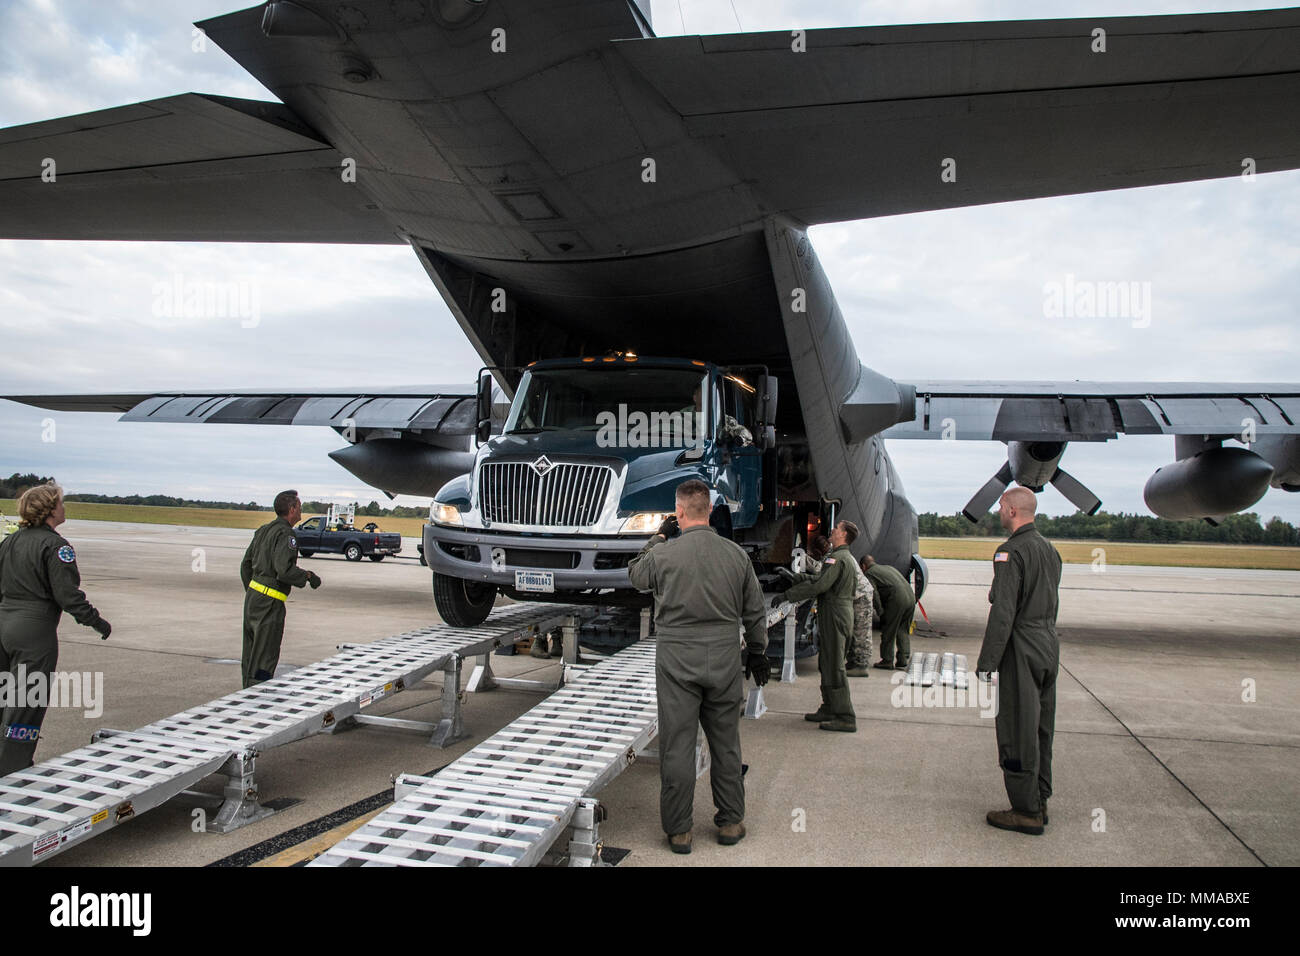 The 179th Airlift Wing along with Airmen from the 178th Wing, Springfield, Ohio, respond to relief efforts needed in Puerto Rico October 4, 2017. The 179th AW sends one of its C-130H Hercules loaded with a Disaster Relief Mobile Kitchen Trailer (DRMKT) with services Airmen from both units. Airmen from both units will use the extremely flexible DRMKT, which supports virtually any field-feeding scenario, form quickly prepared boil-in-the-bag meals to restaurant-quality meals for up to 1,000 people in under 90 minutes. The 179th AW is always ready to respond with a team of trusted Airmen for stat Stock Photo